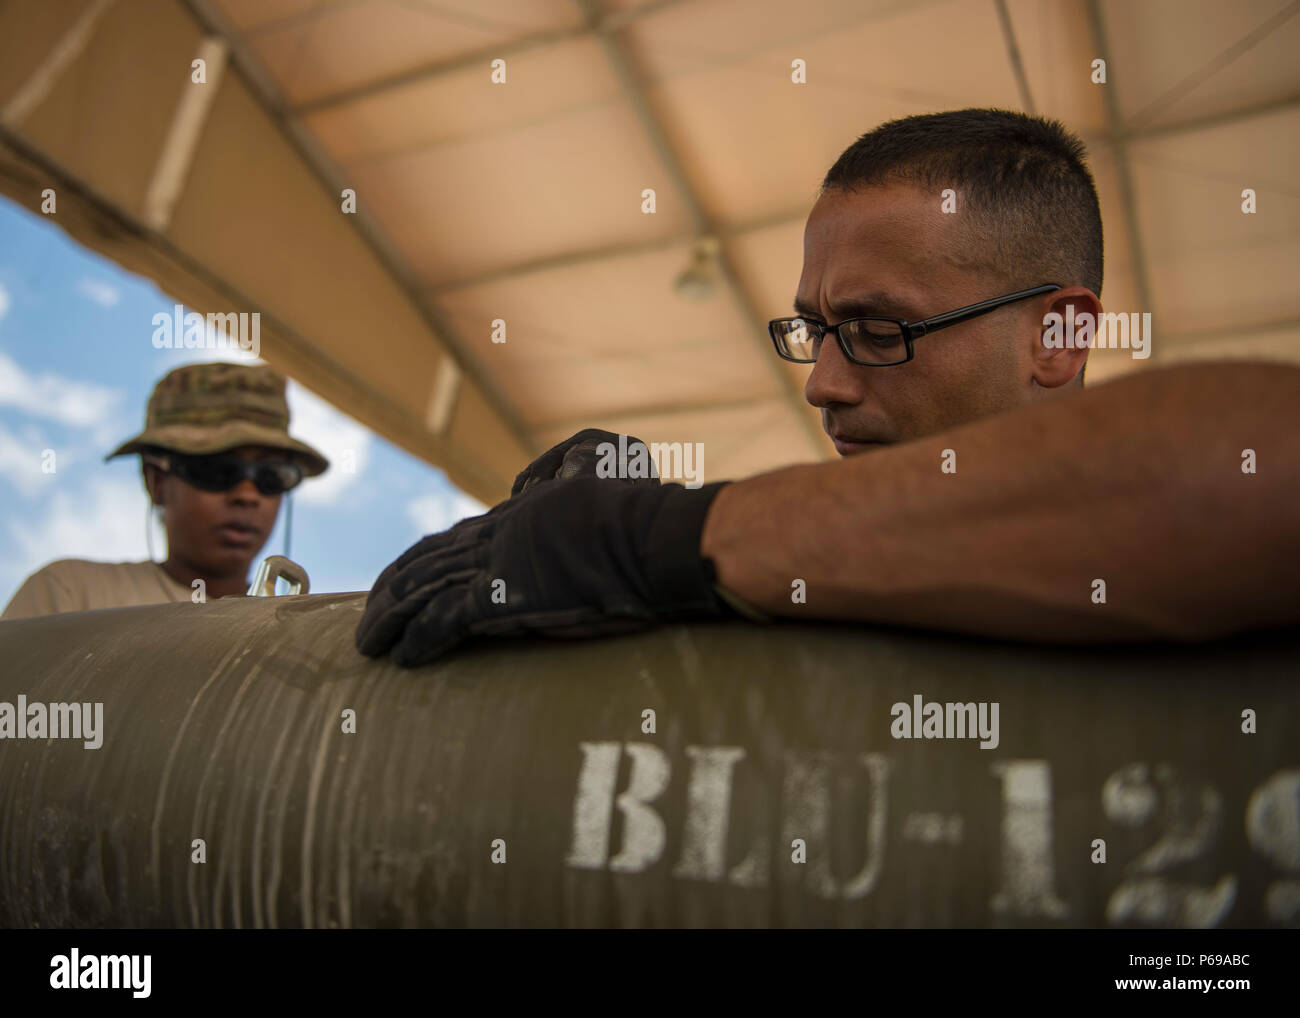 Staff Sgt. Alejandro Medina, 455th Expeditionary Maintenance Squadron Munitions Flight munitions system specialist, helps build a GBU-54 munition at Bagram Airfield, Afghanistan, May 26, 2016. The munitions flight storage is responsible for the accountability of small arms ammunitions to large-scale guided bomb units. (U.S. Air Force photo by Senior Airman Justyn M. Freeman) Stock Photo